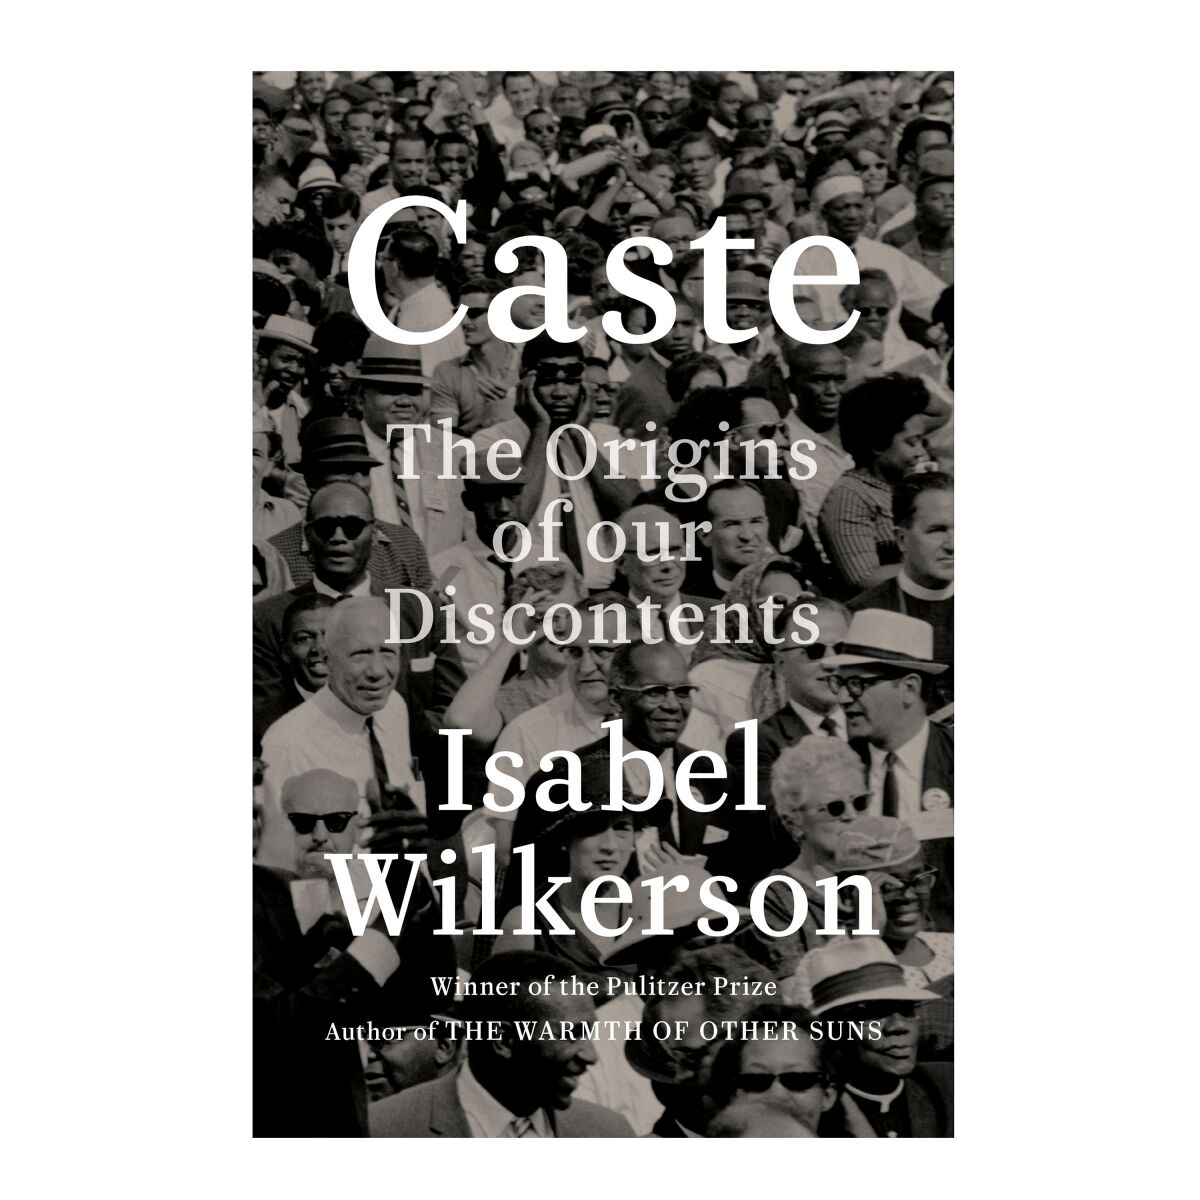 HOLIDAY GIFT GUIDE - Cover of the book Caste by Isabel Wilkerson.